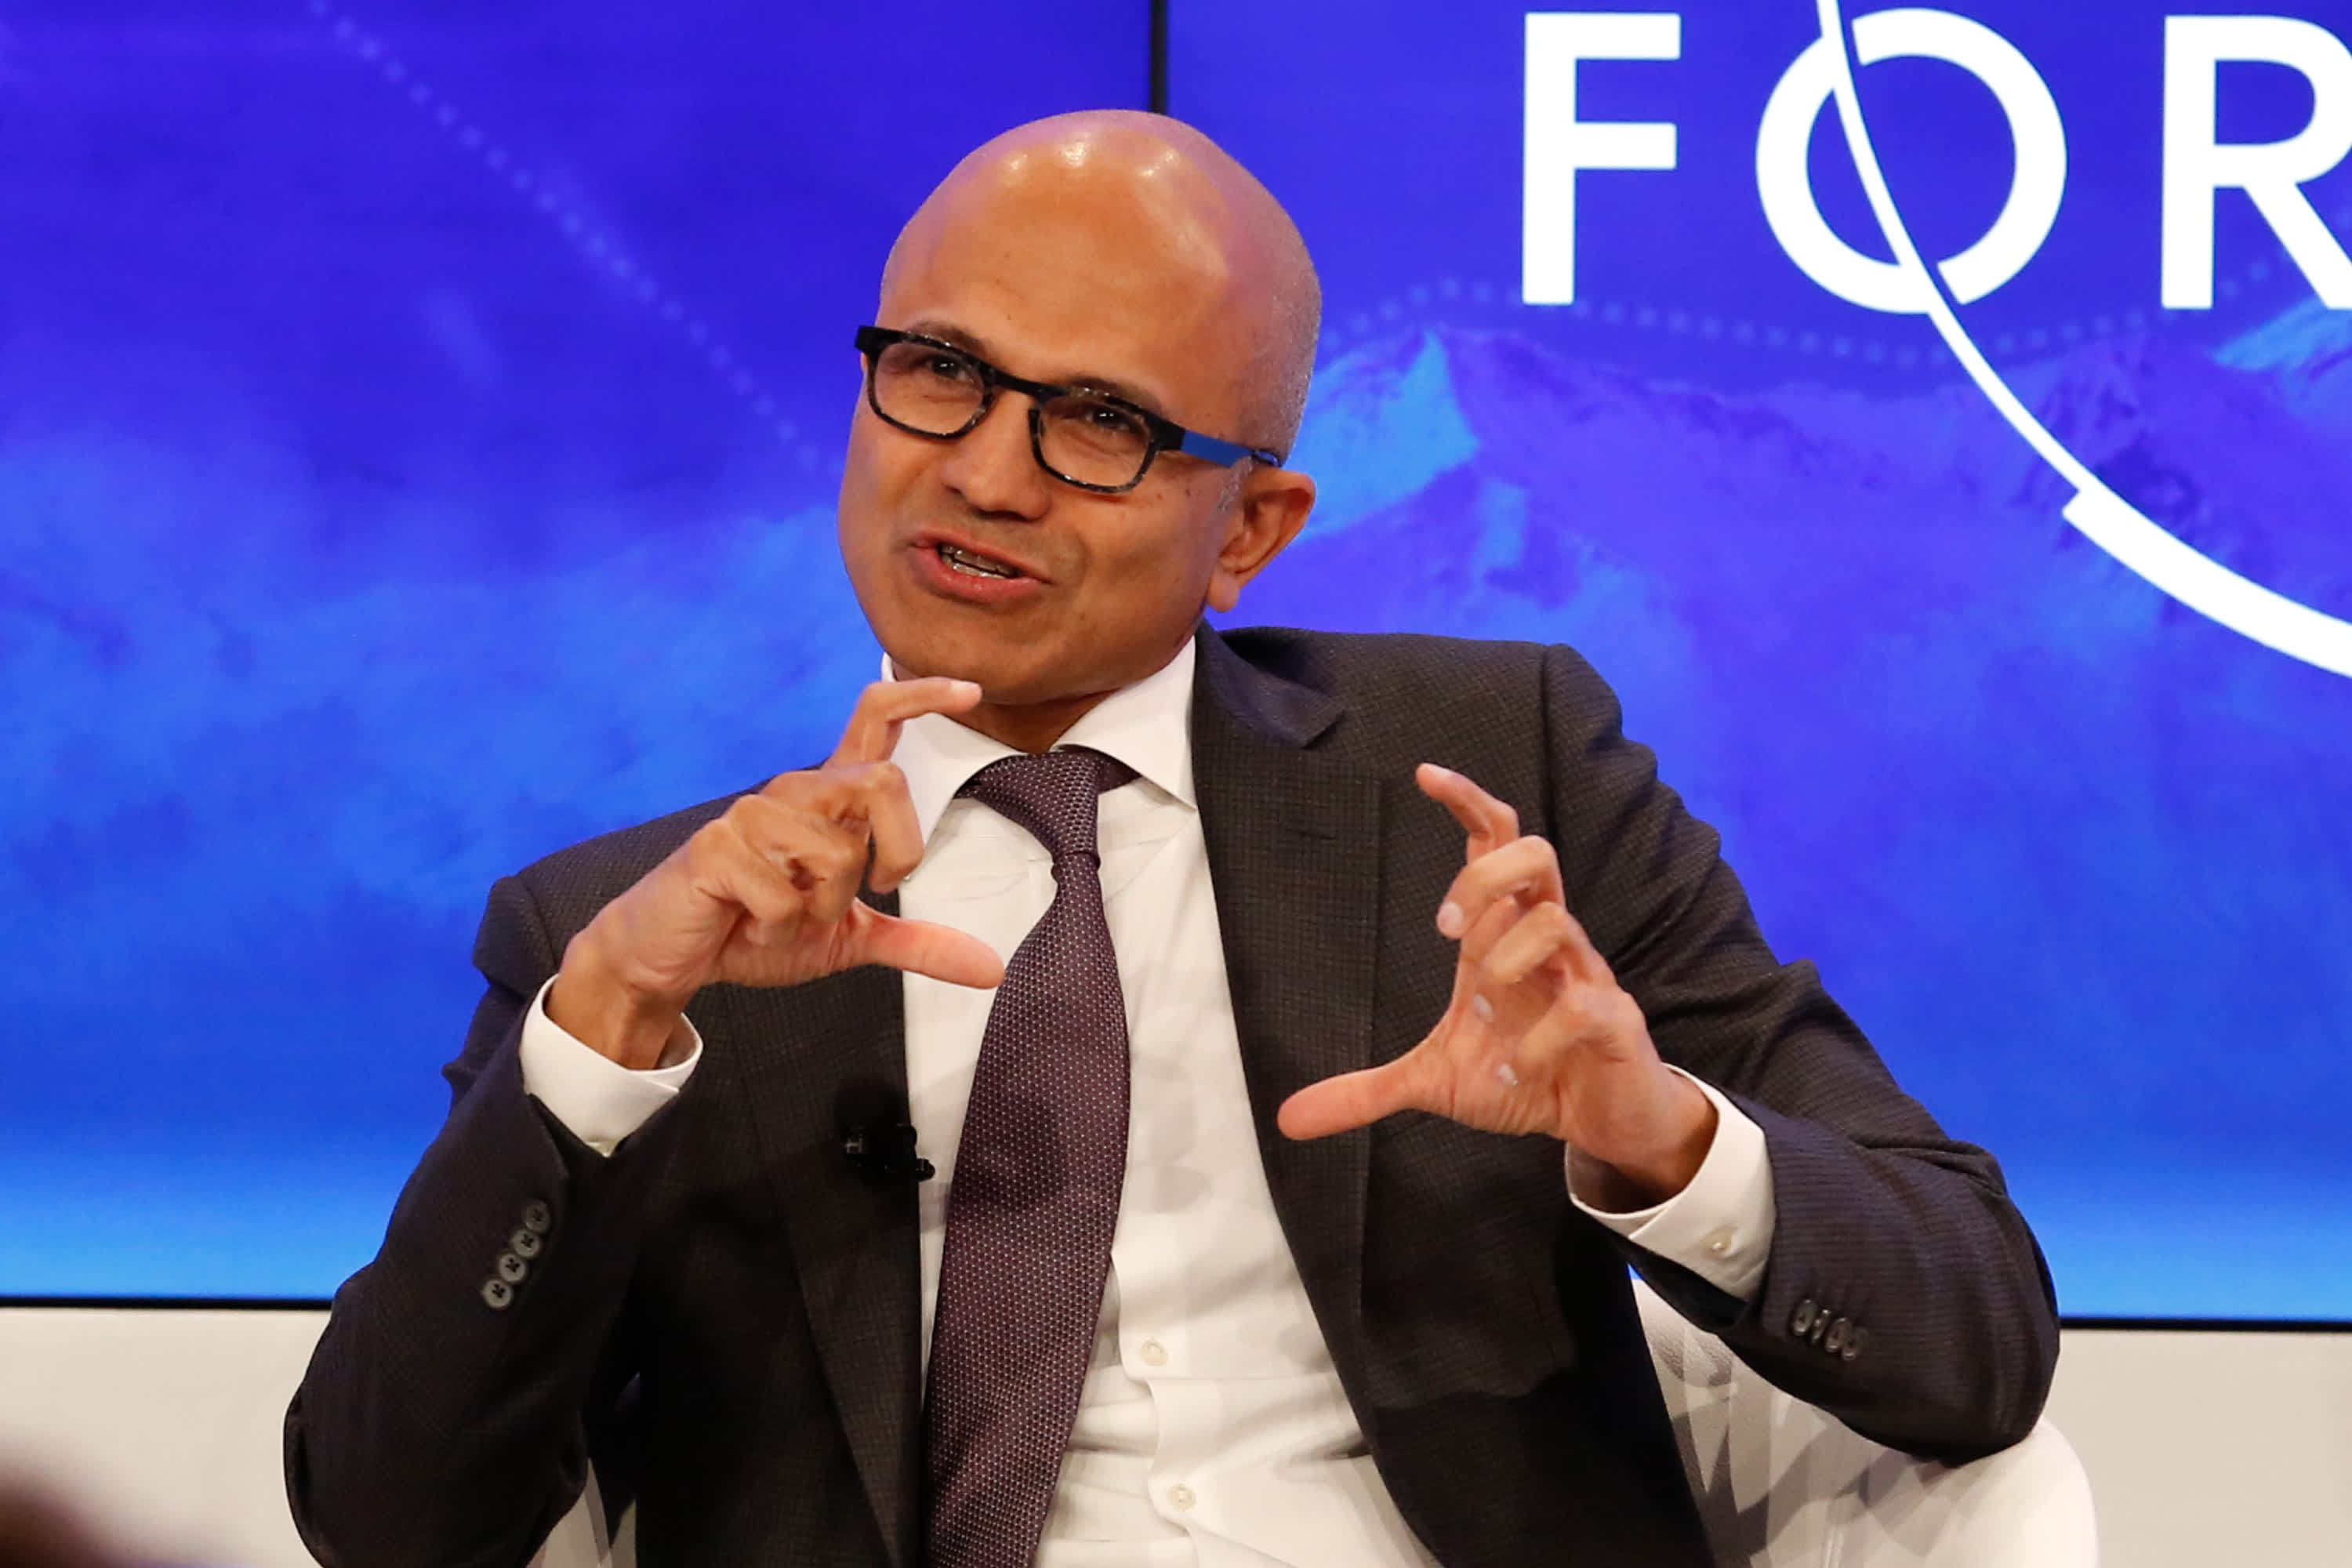 Microsoft said Wednesday that CEO Satya Nadella is becoming the chair of the company's board, replacing independent director John Thompson, follo